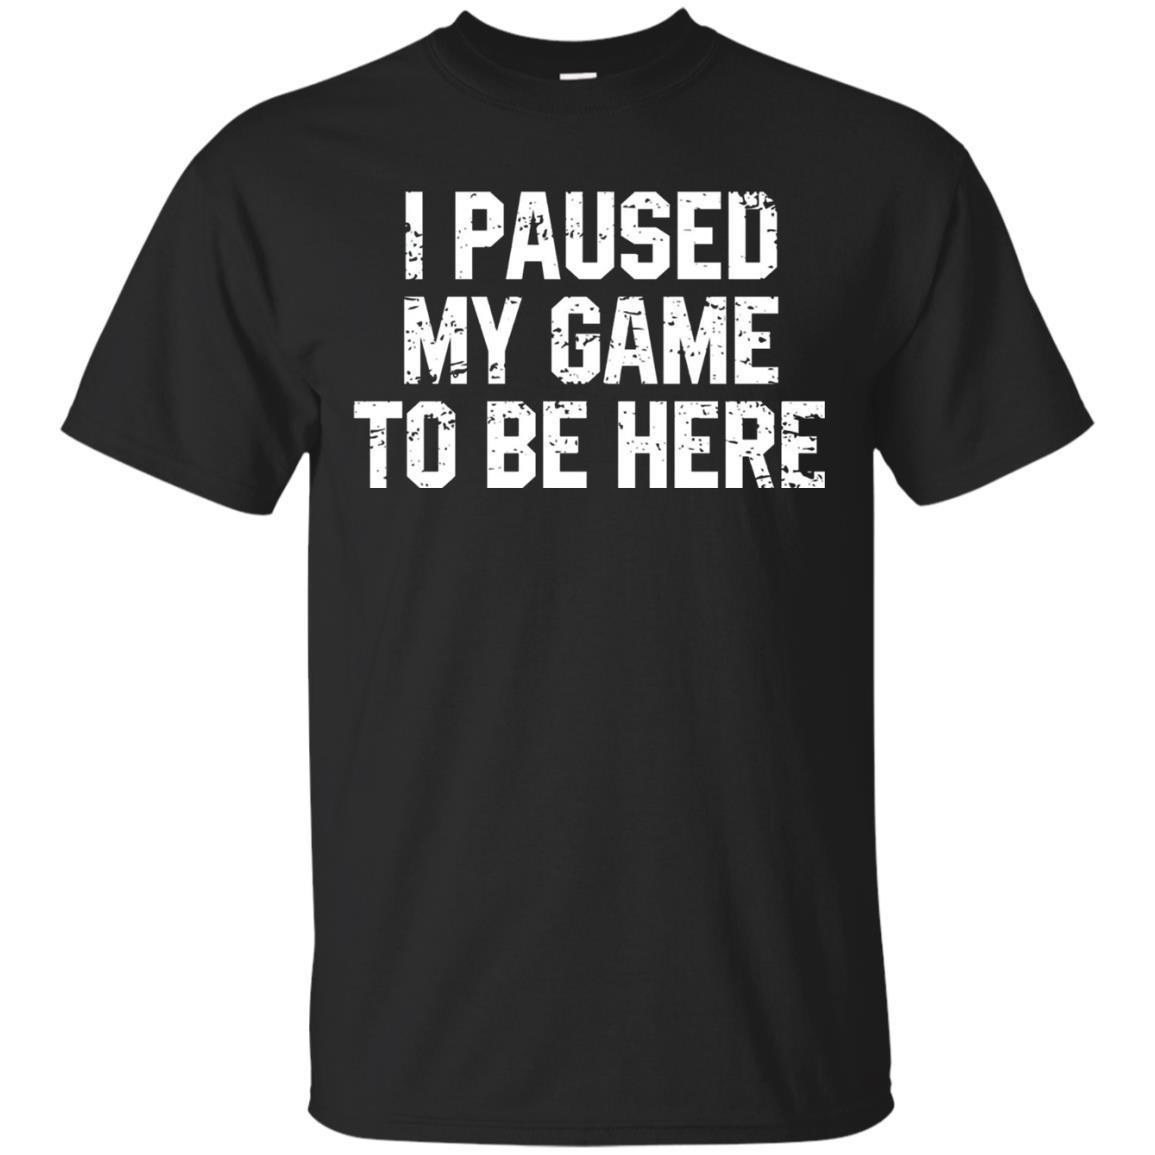 I Paused My Game To Be Here Funny Gamer Gift Nerd Geek Shirt T-shirt ...